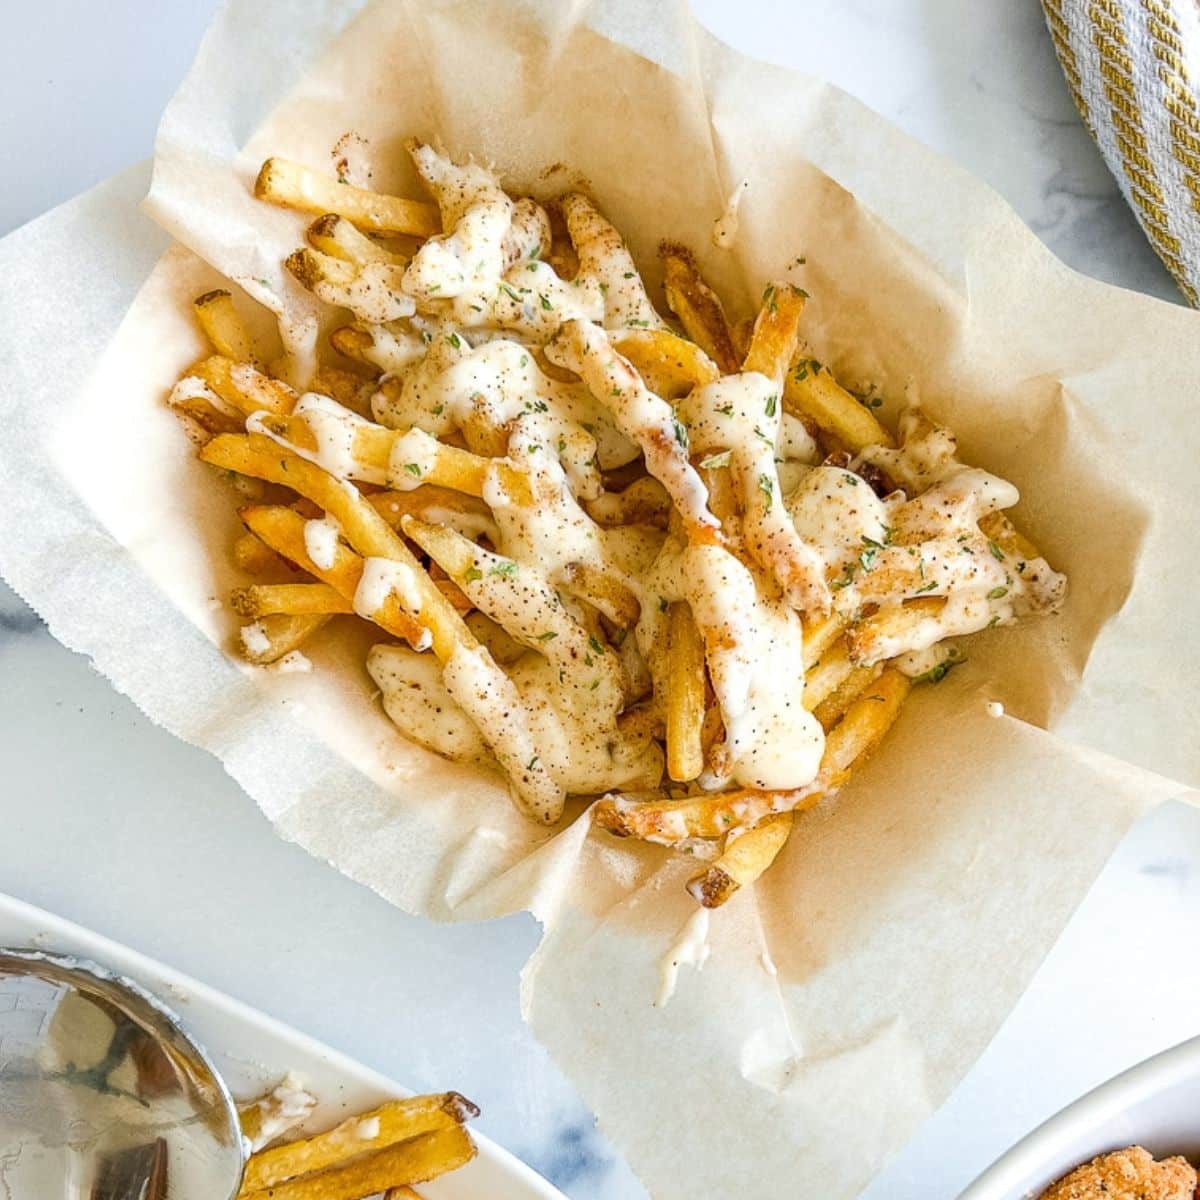 Louisiana Voodoo fries with kicked up ranch dressing.